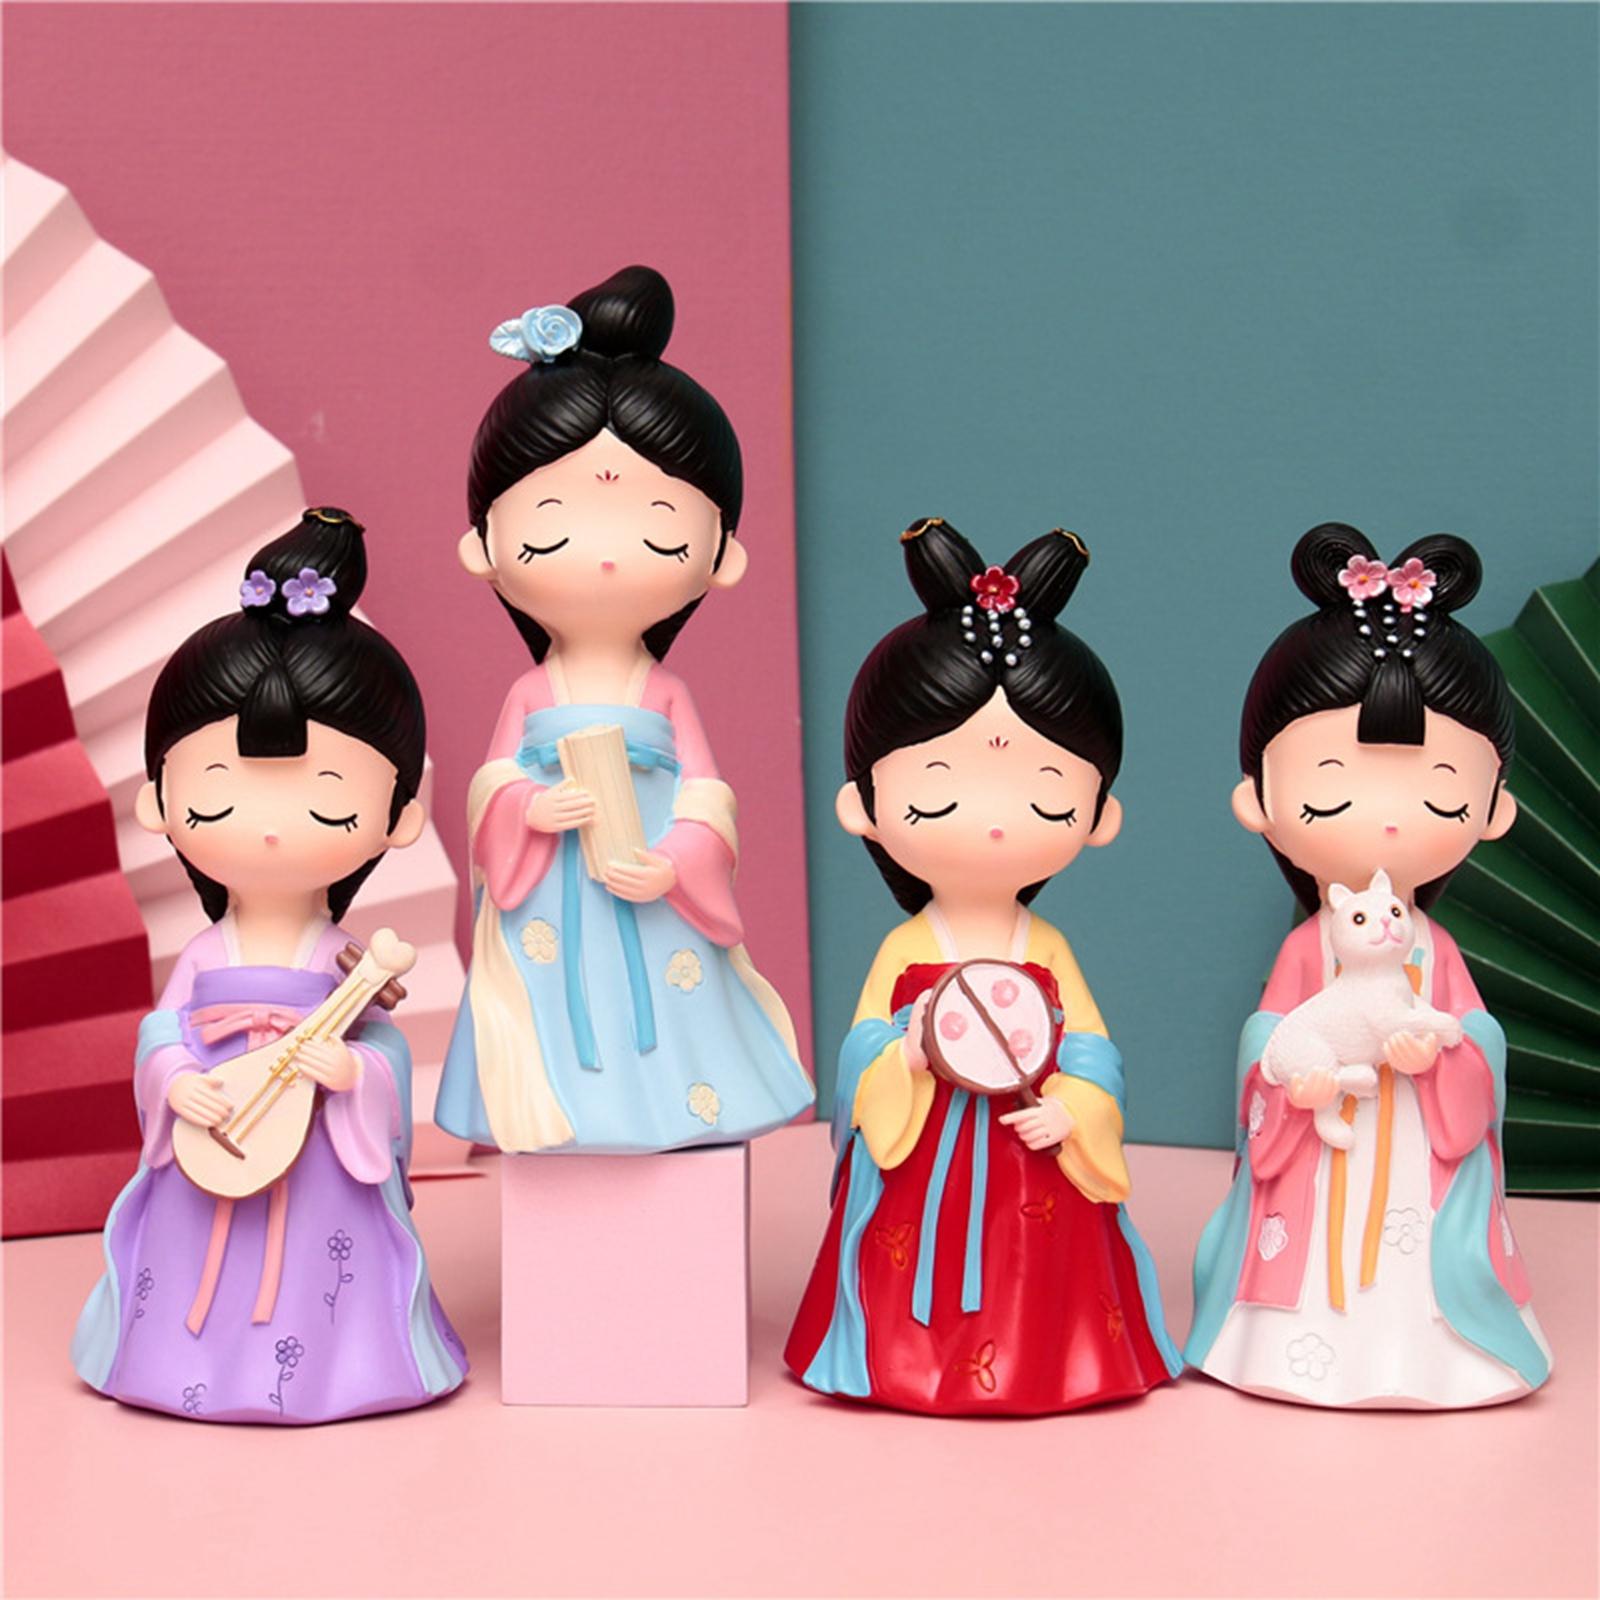 Ancient Chinese Girl Dolls Collectible Figurines Handicraft Girls Gift With Cat